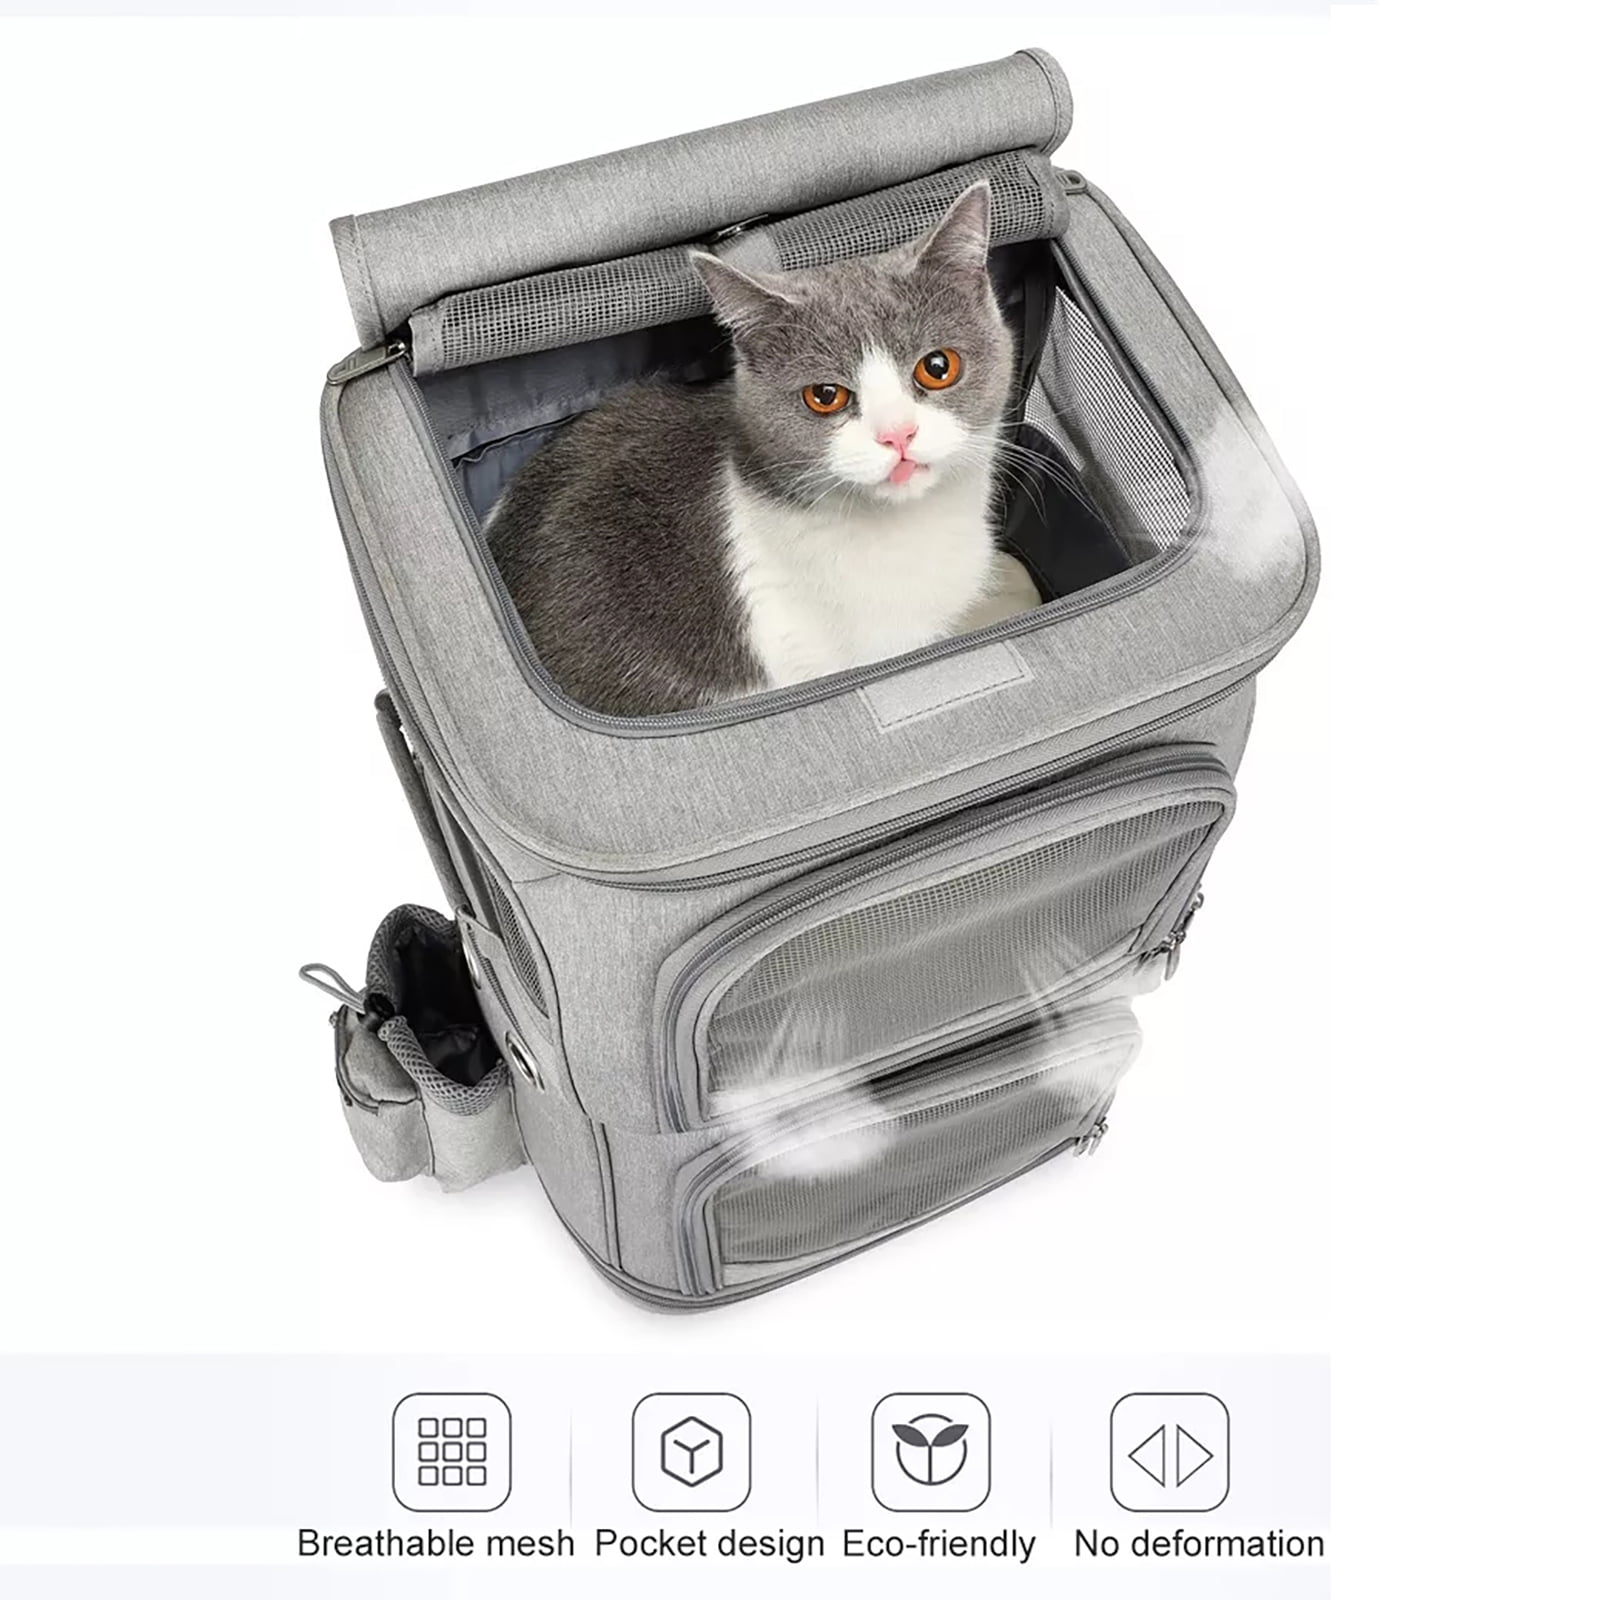 Portable Breathable Pet Carrier Bag Softsided Travel Handbag For Dogs Cats  ▻  ▻ Free Shipping ▻ Up to 70% OFF